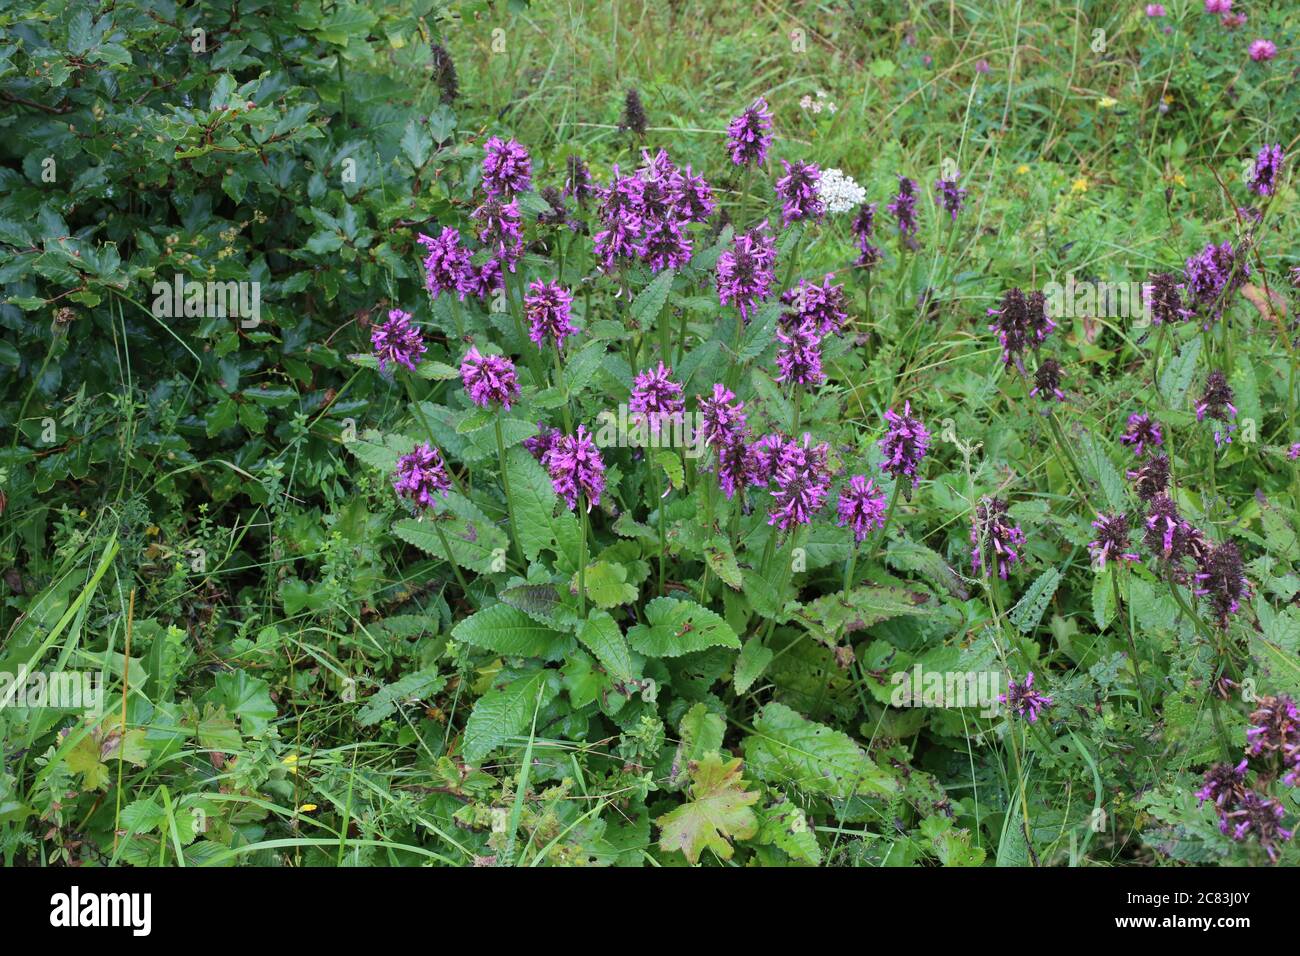 Stachys officinalis, Betony. Wild plant shot in summer. Stock Photo